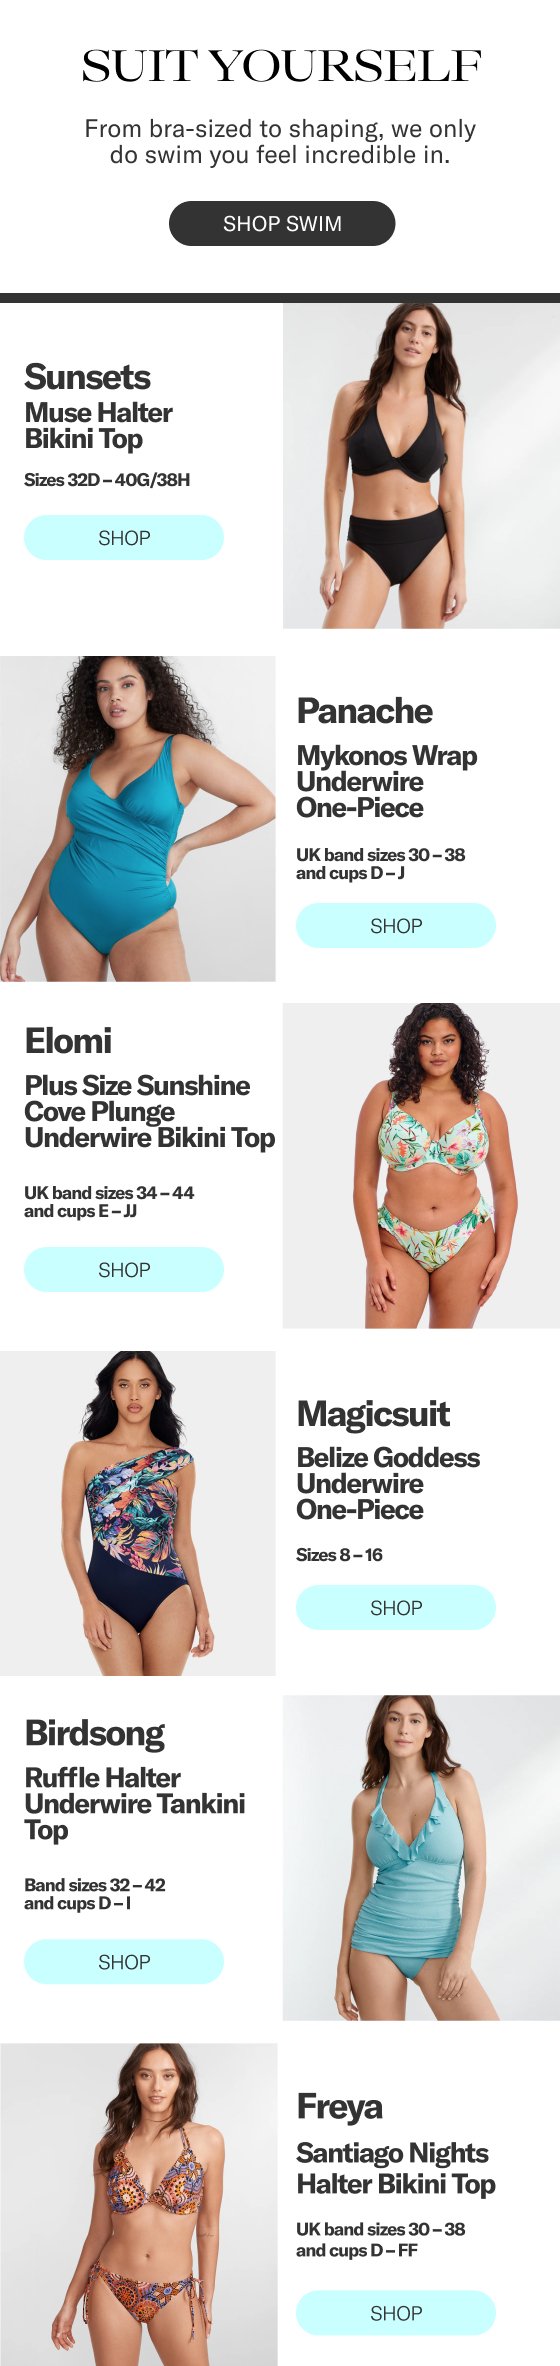 From Bra-Sized To Shaping: Swimwear That Suits You! - Bare Necessities